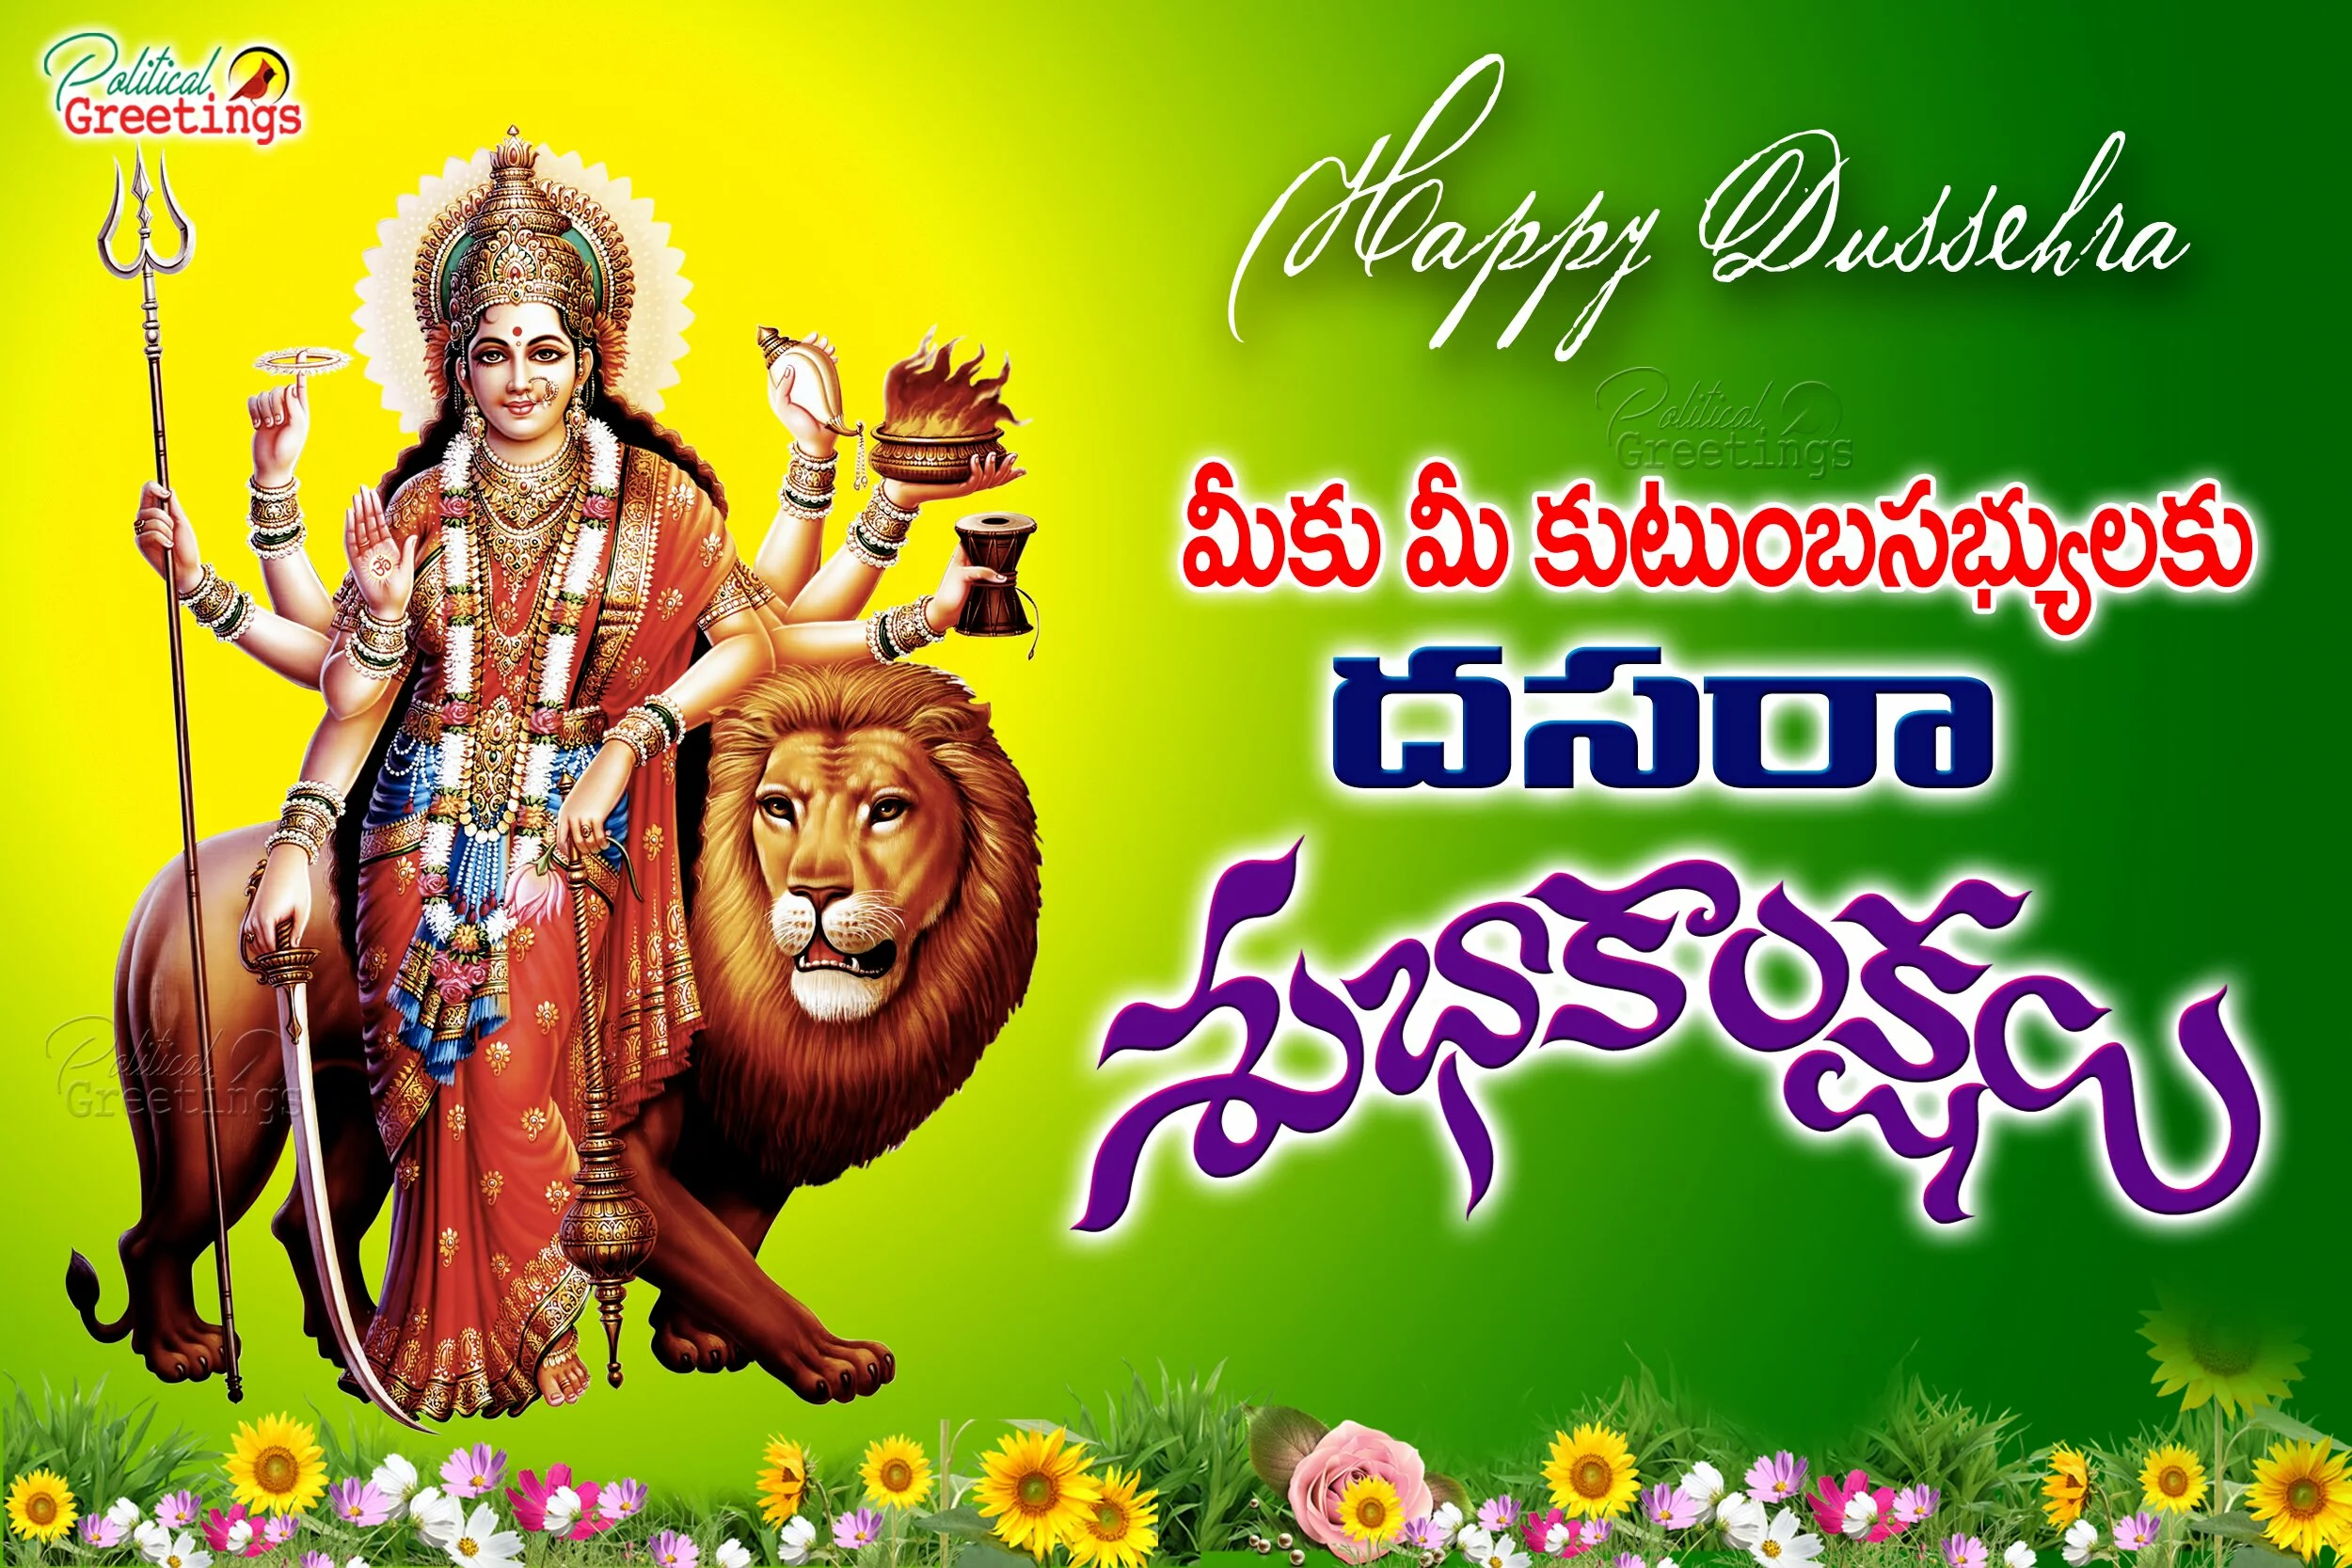 Happy Dasara Telugu Wishes Quotations nice Sms Greetings With Durga Maata Images